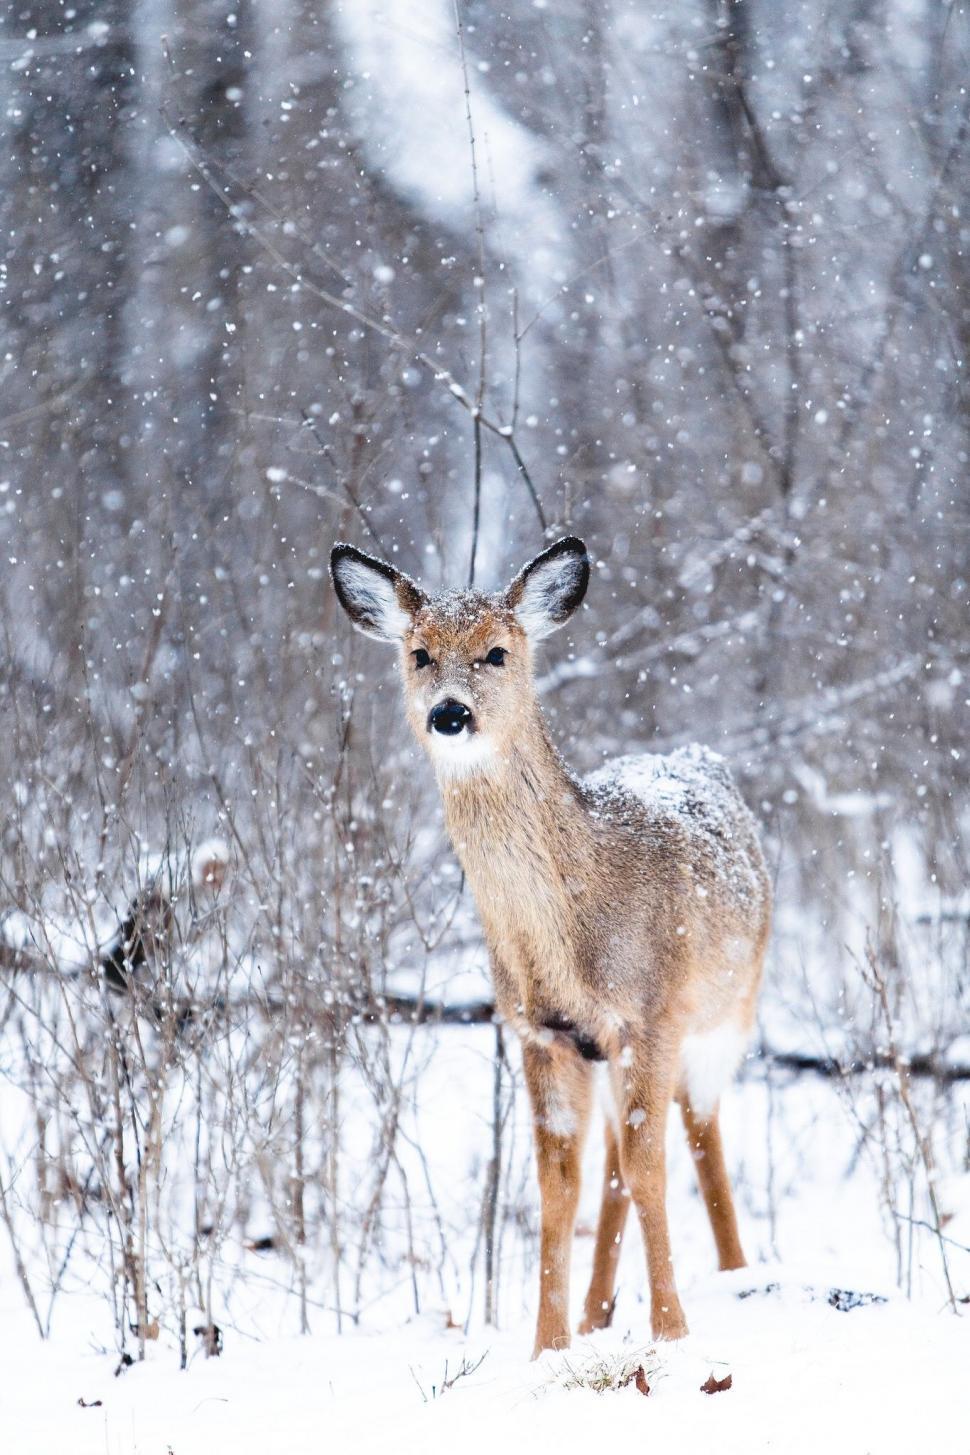 Free Image of Deer Standing in Snowy Forest 